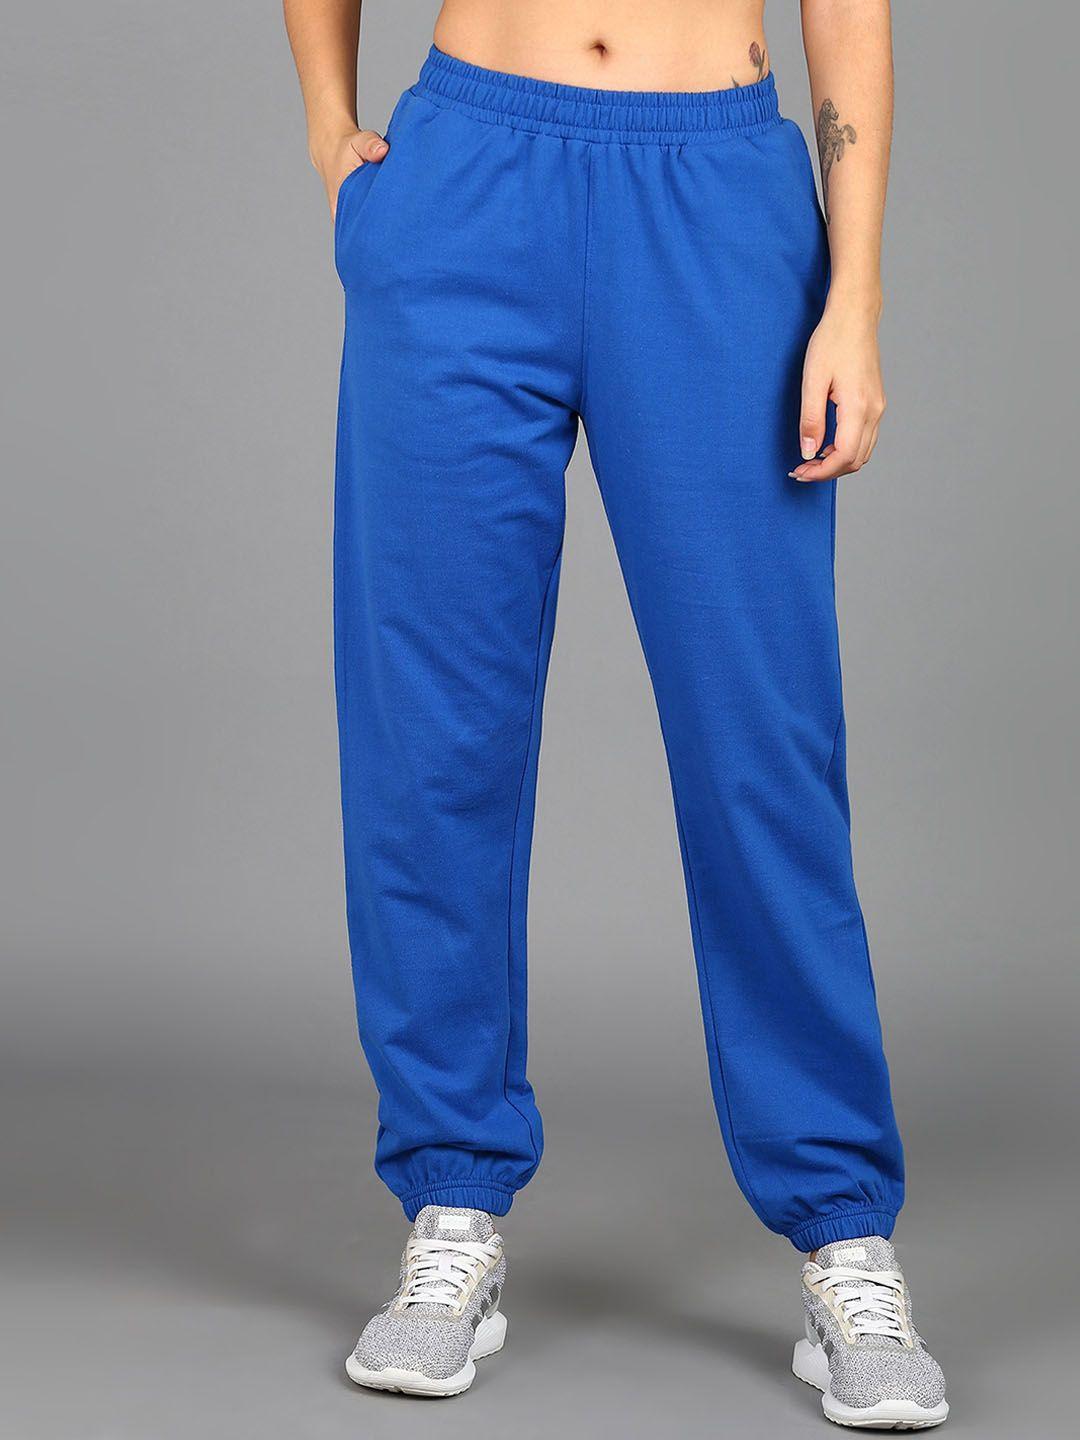 the-roadster-lifestyle-co.-women-blue-mid-rise-joggers